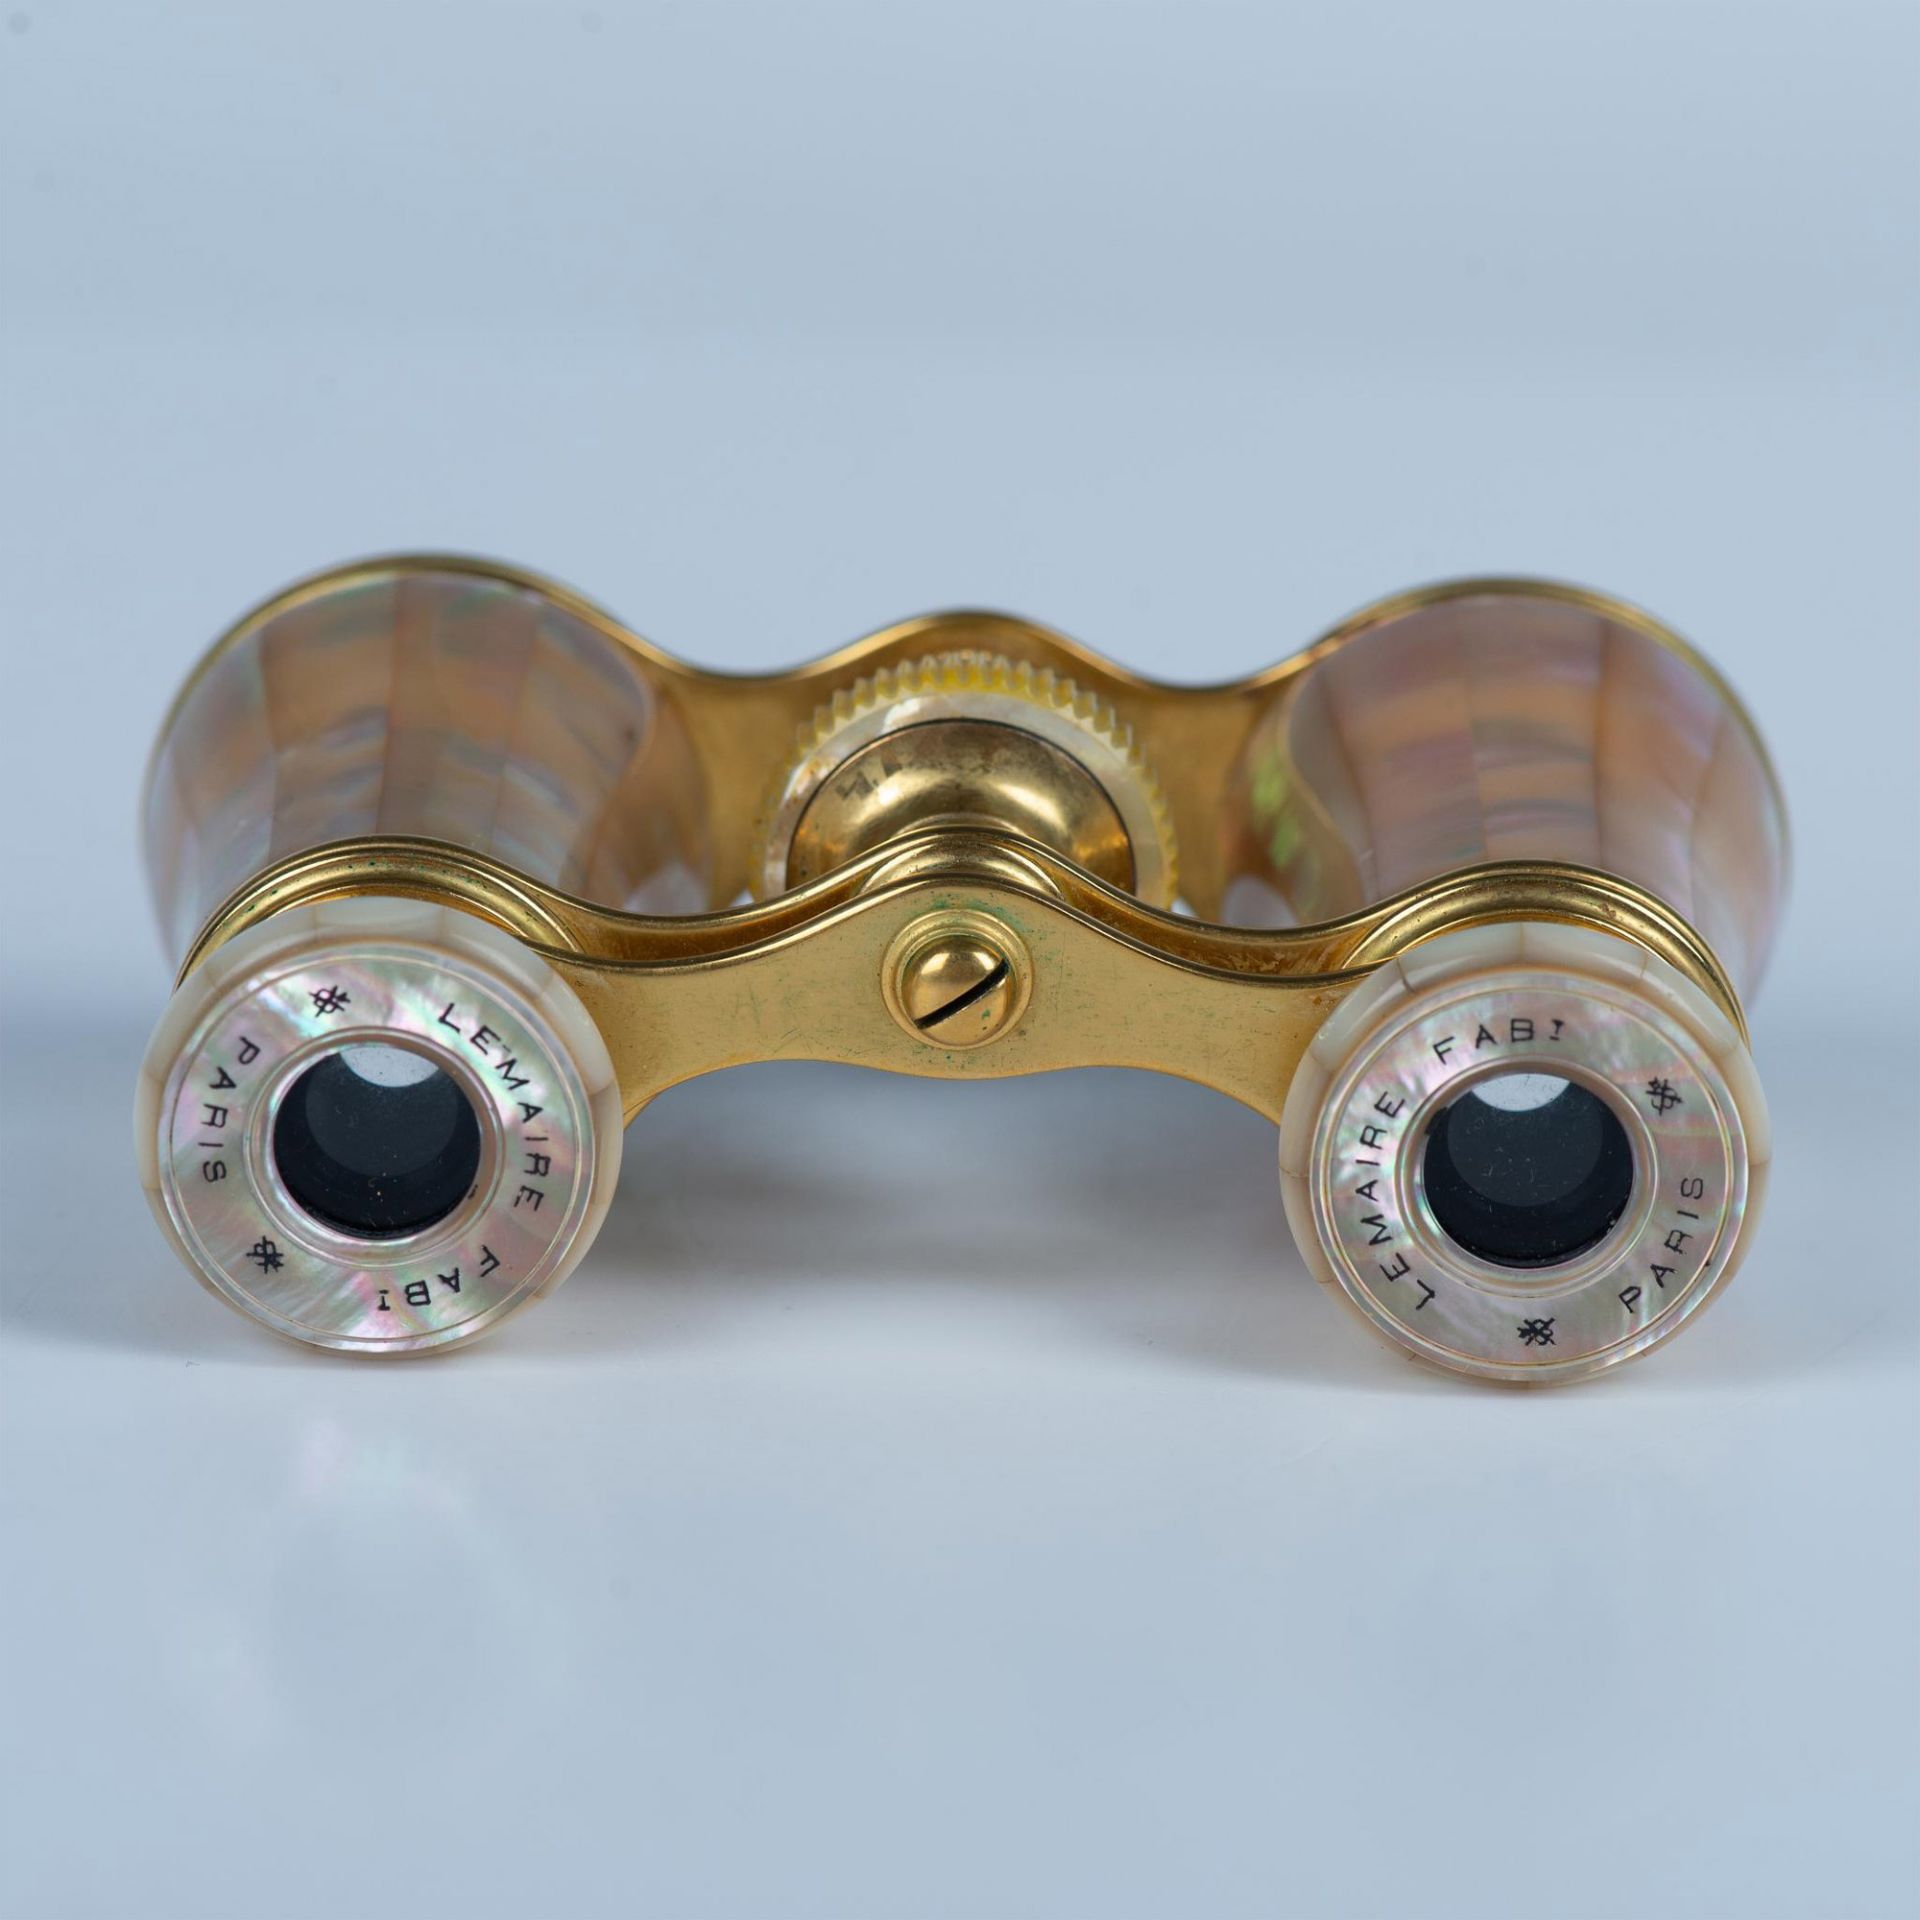 Lemaire Paris Mother of Pearl Fabt Opera Glasses & Case - Image 5 of 6